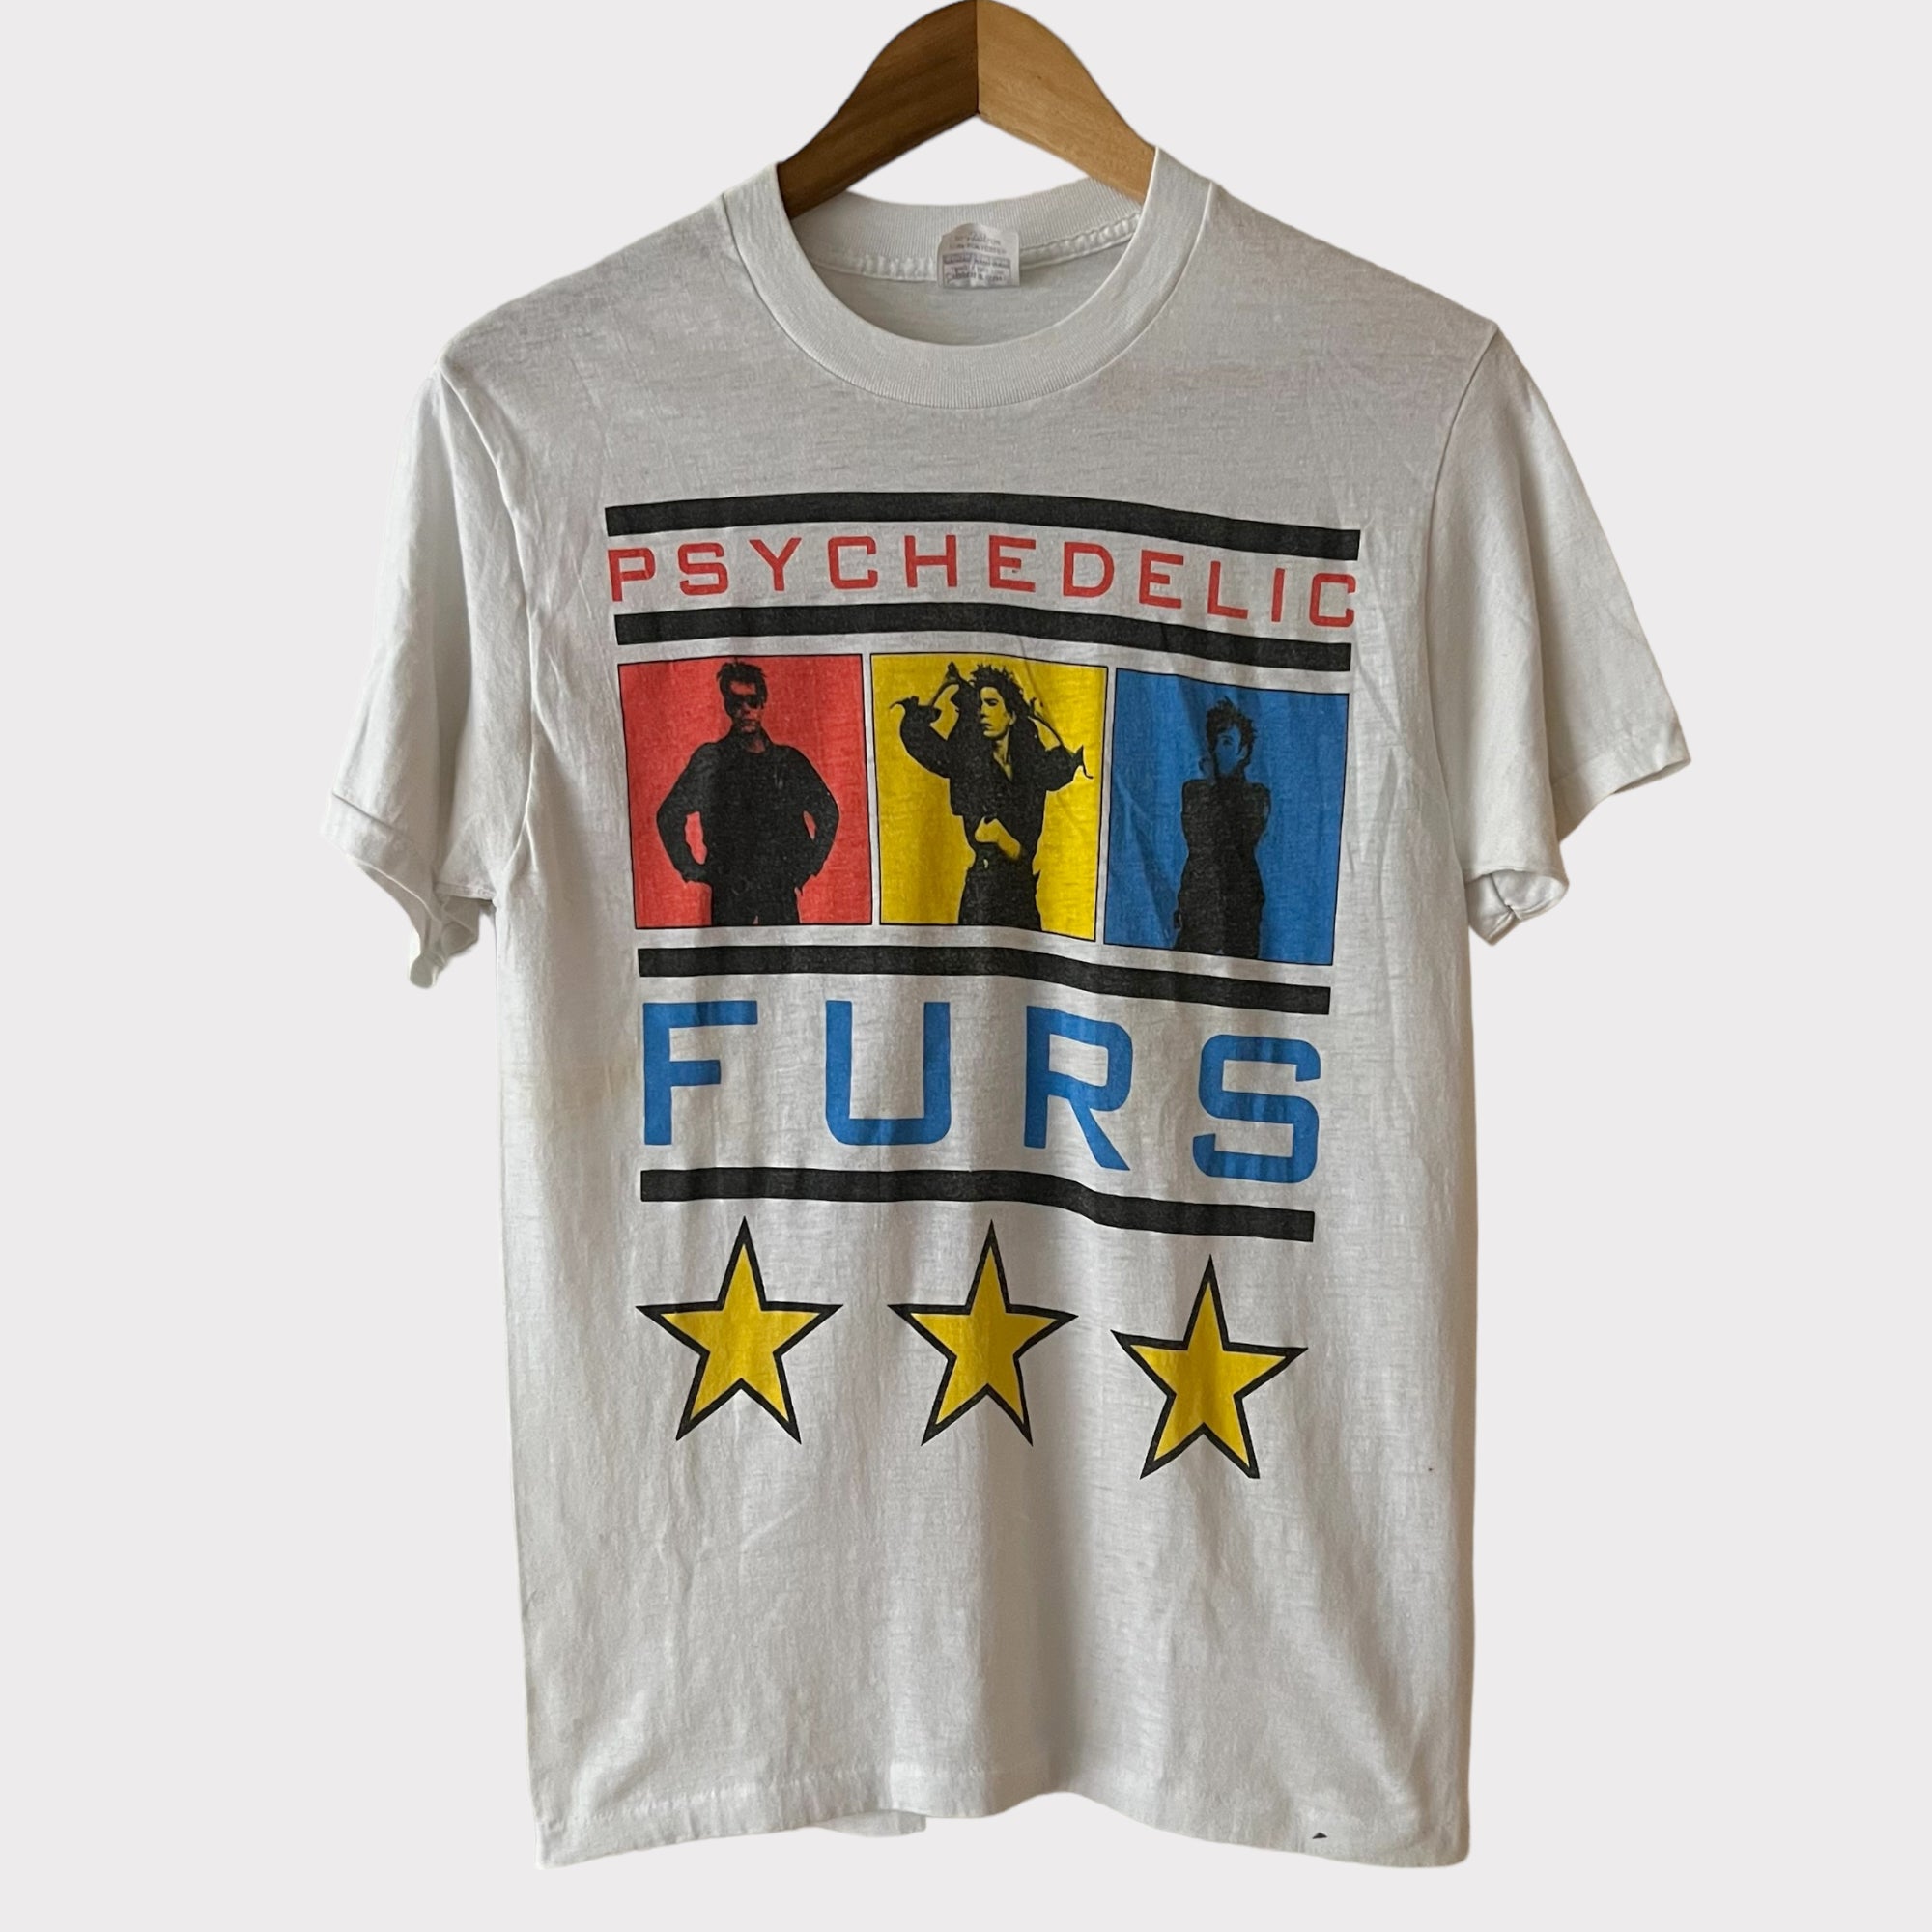 1987 Psychedelic Furs Tour Vintage Tee Shirt